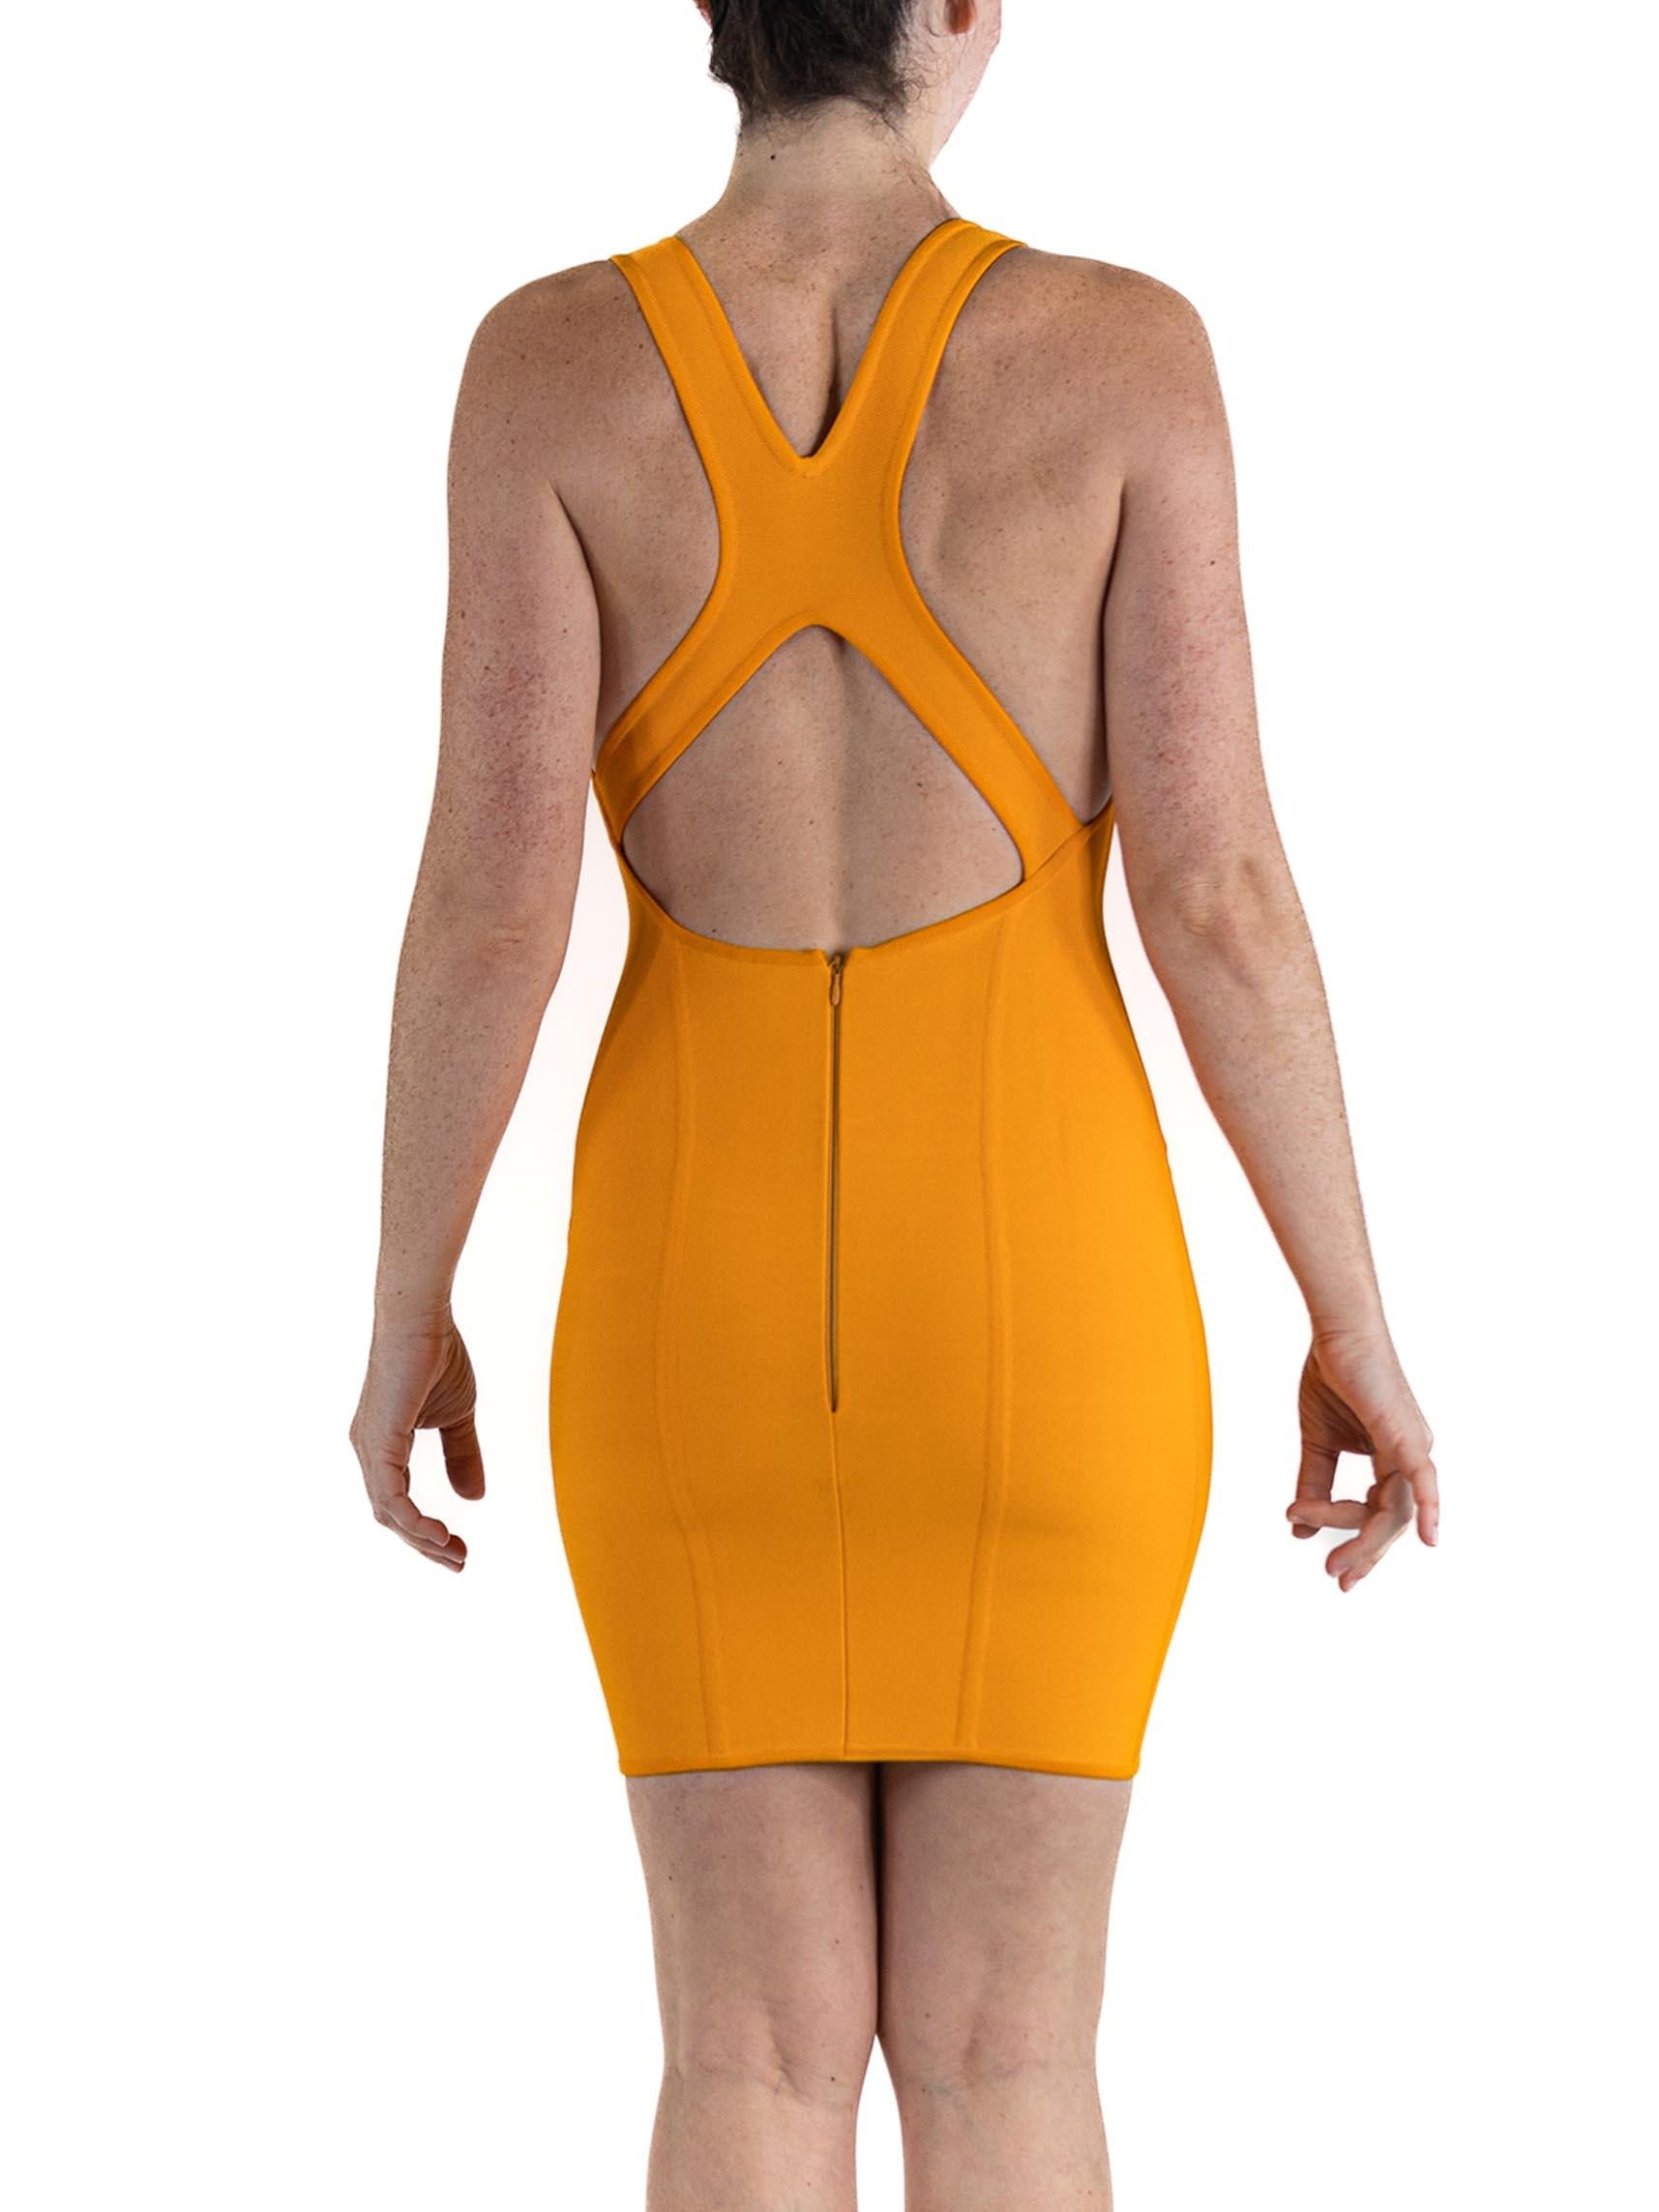 1990S HERVE LEGER Orange Rayon & Lycra Body-Con Cocktail Dress With 4